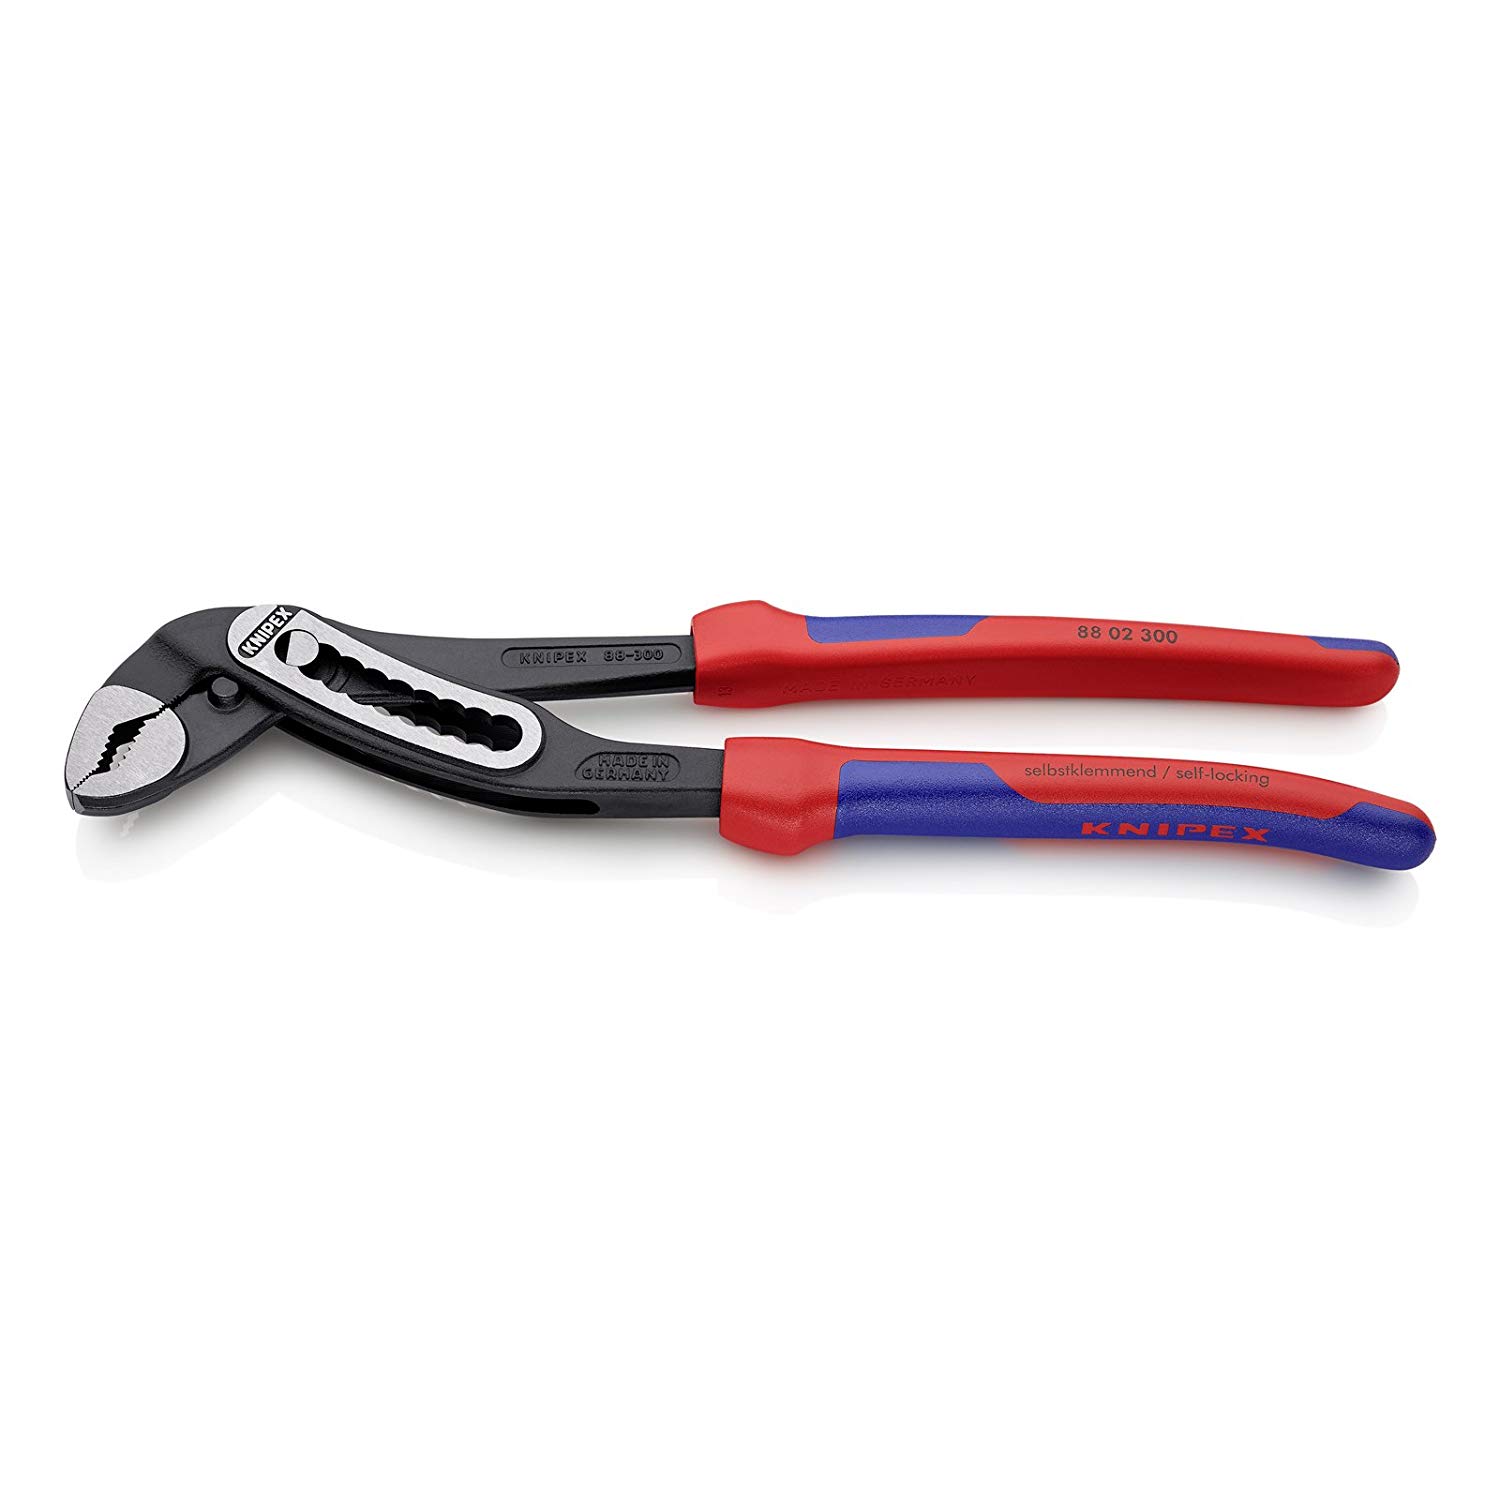 Knipex Alligator 88 02 300 - Pipe / Water Pump Pliers